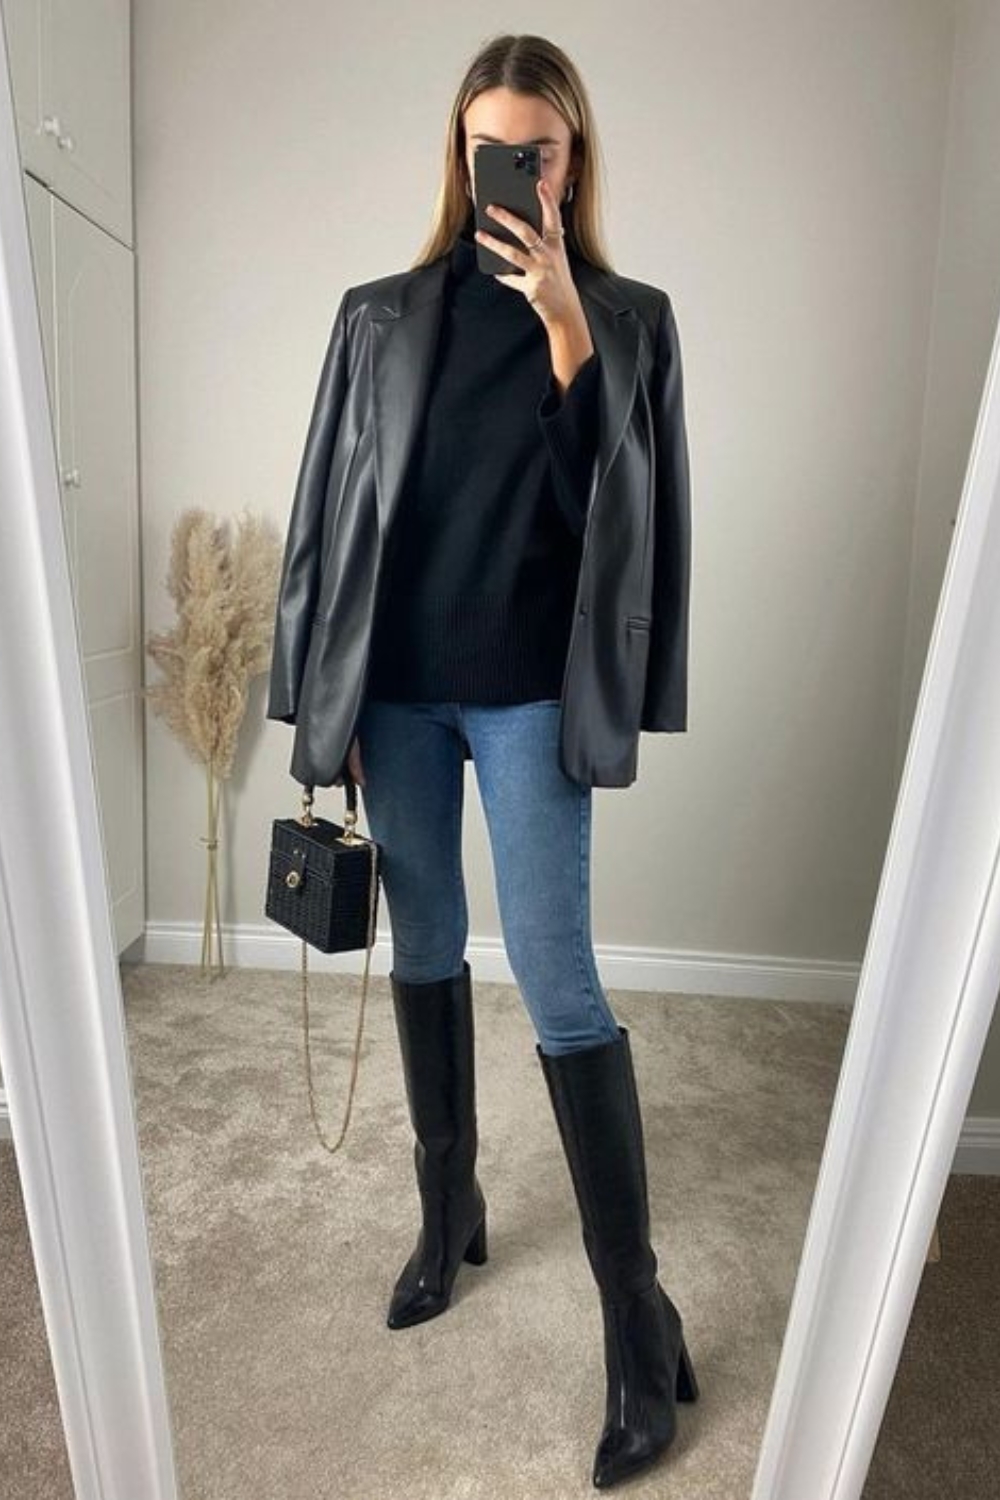 Black sweater outfit with leather blazer